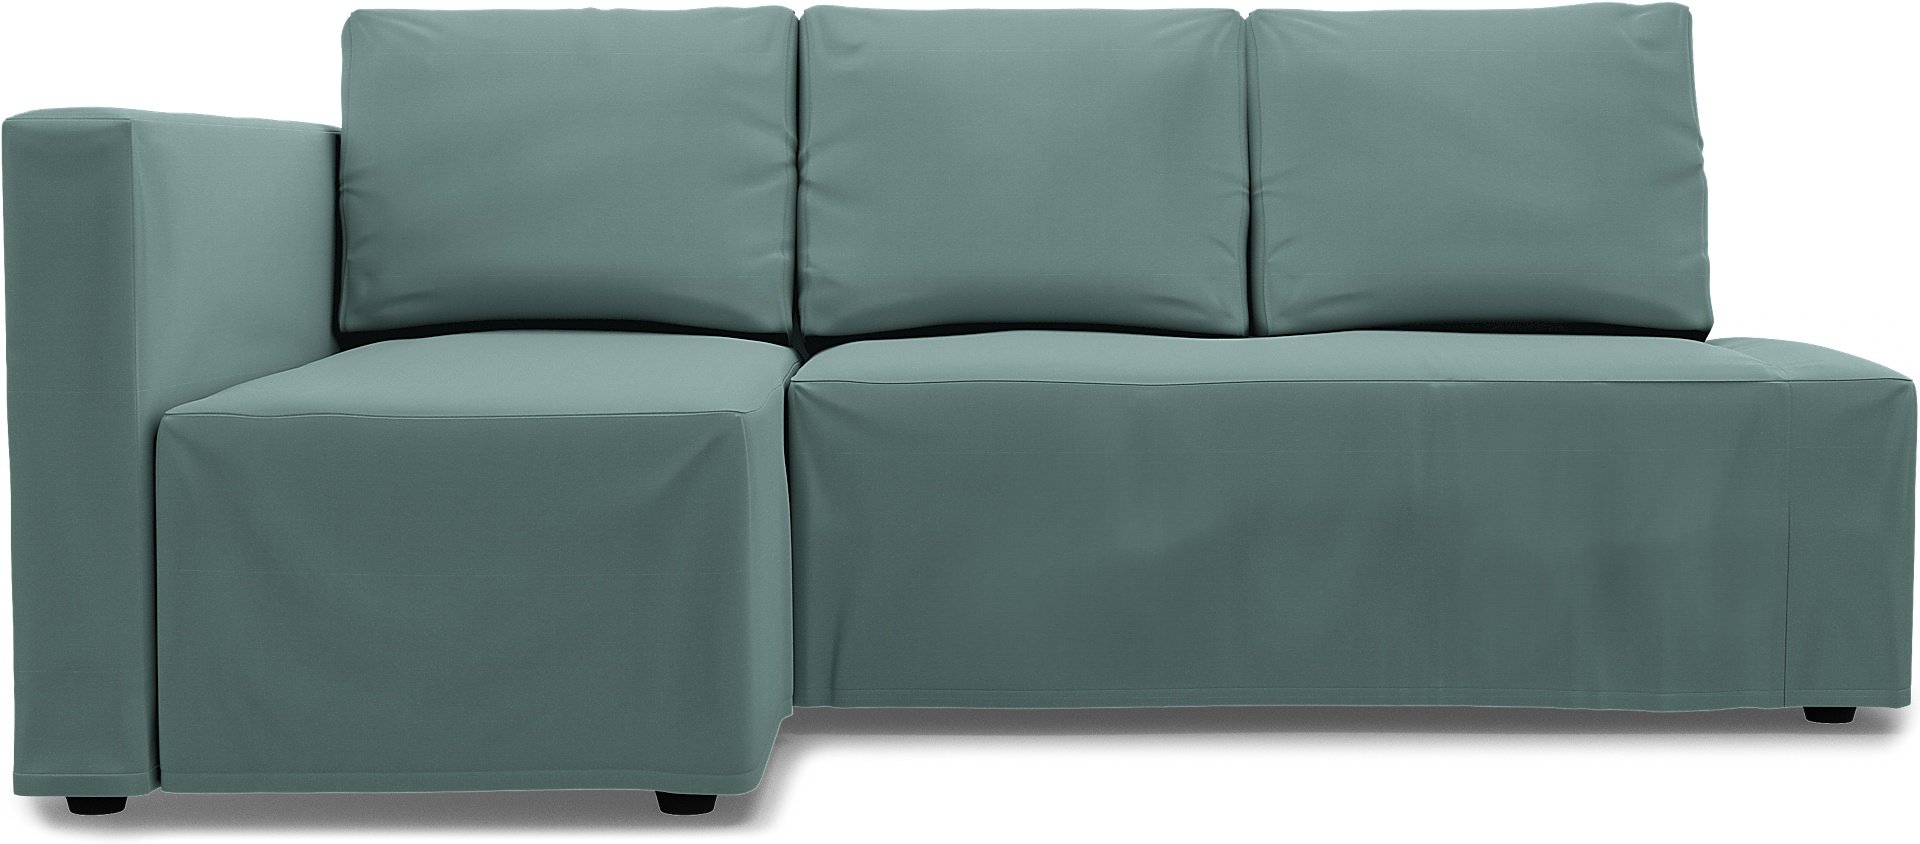 IKEA - Friheten Sofa Bed with Left Chaise Cover, Mineral Blue, Cotton - Bemz